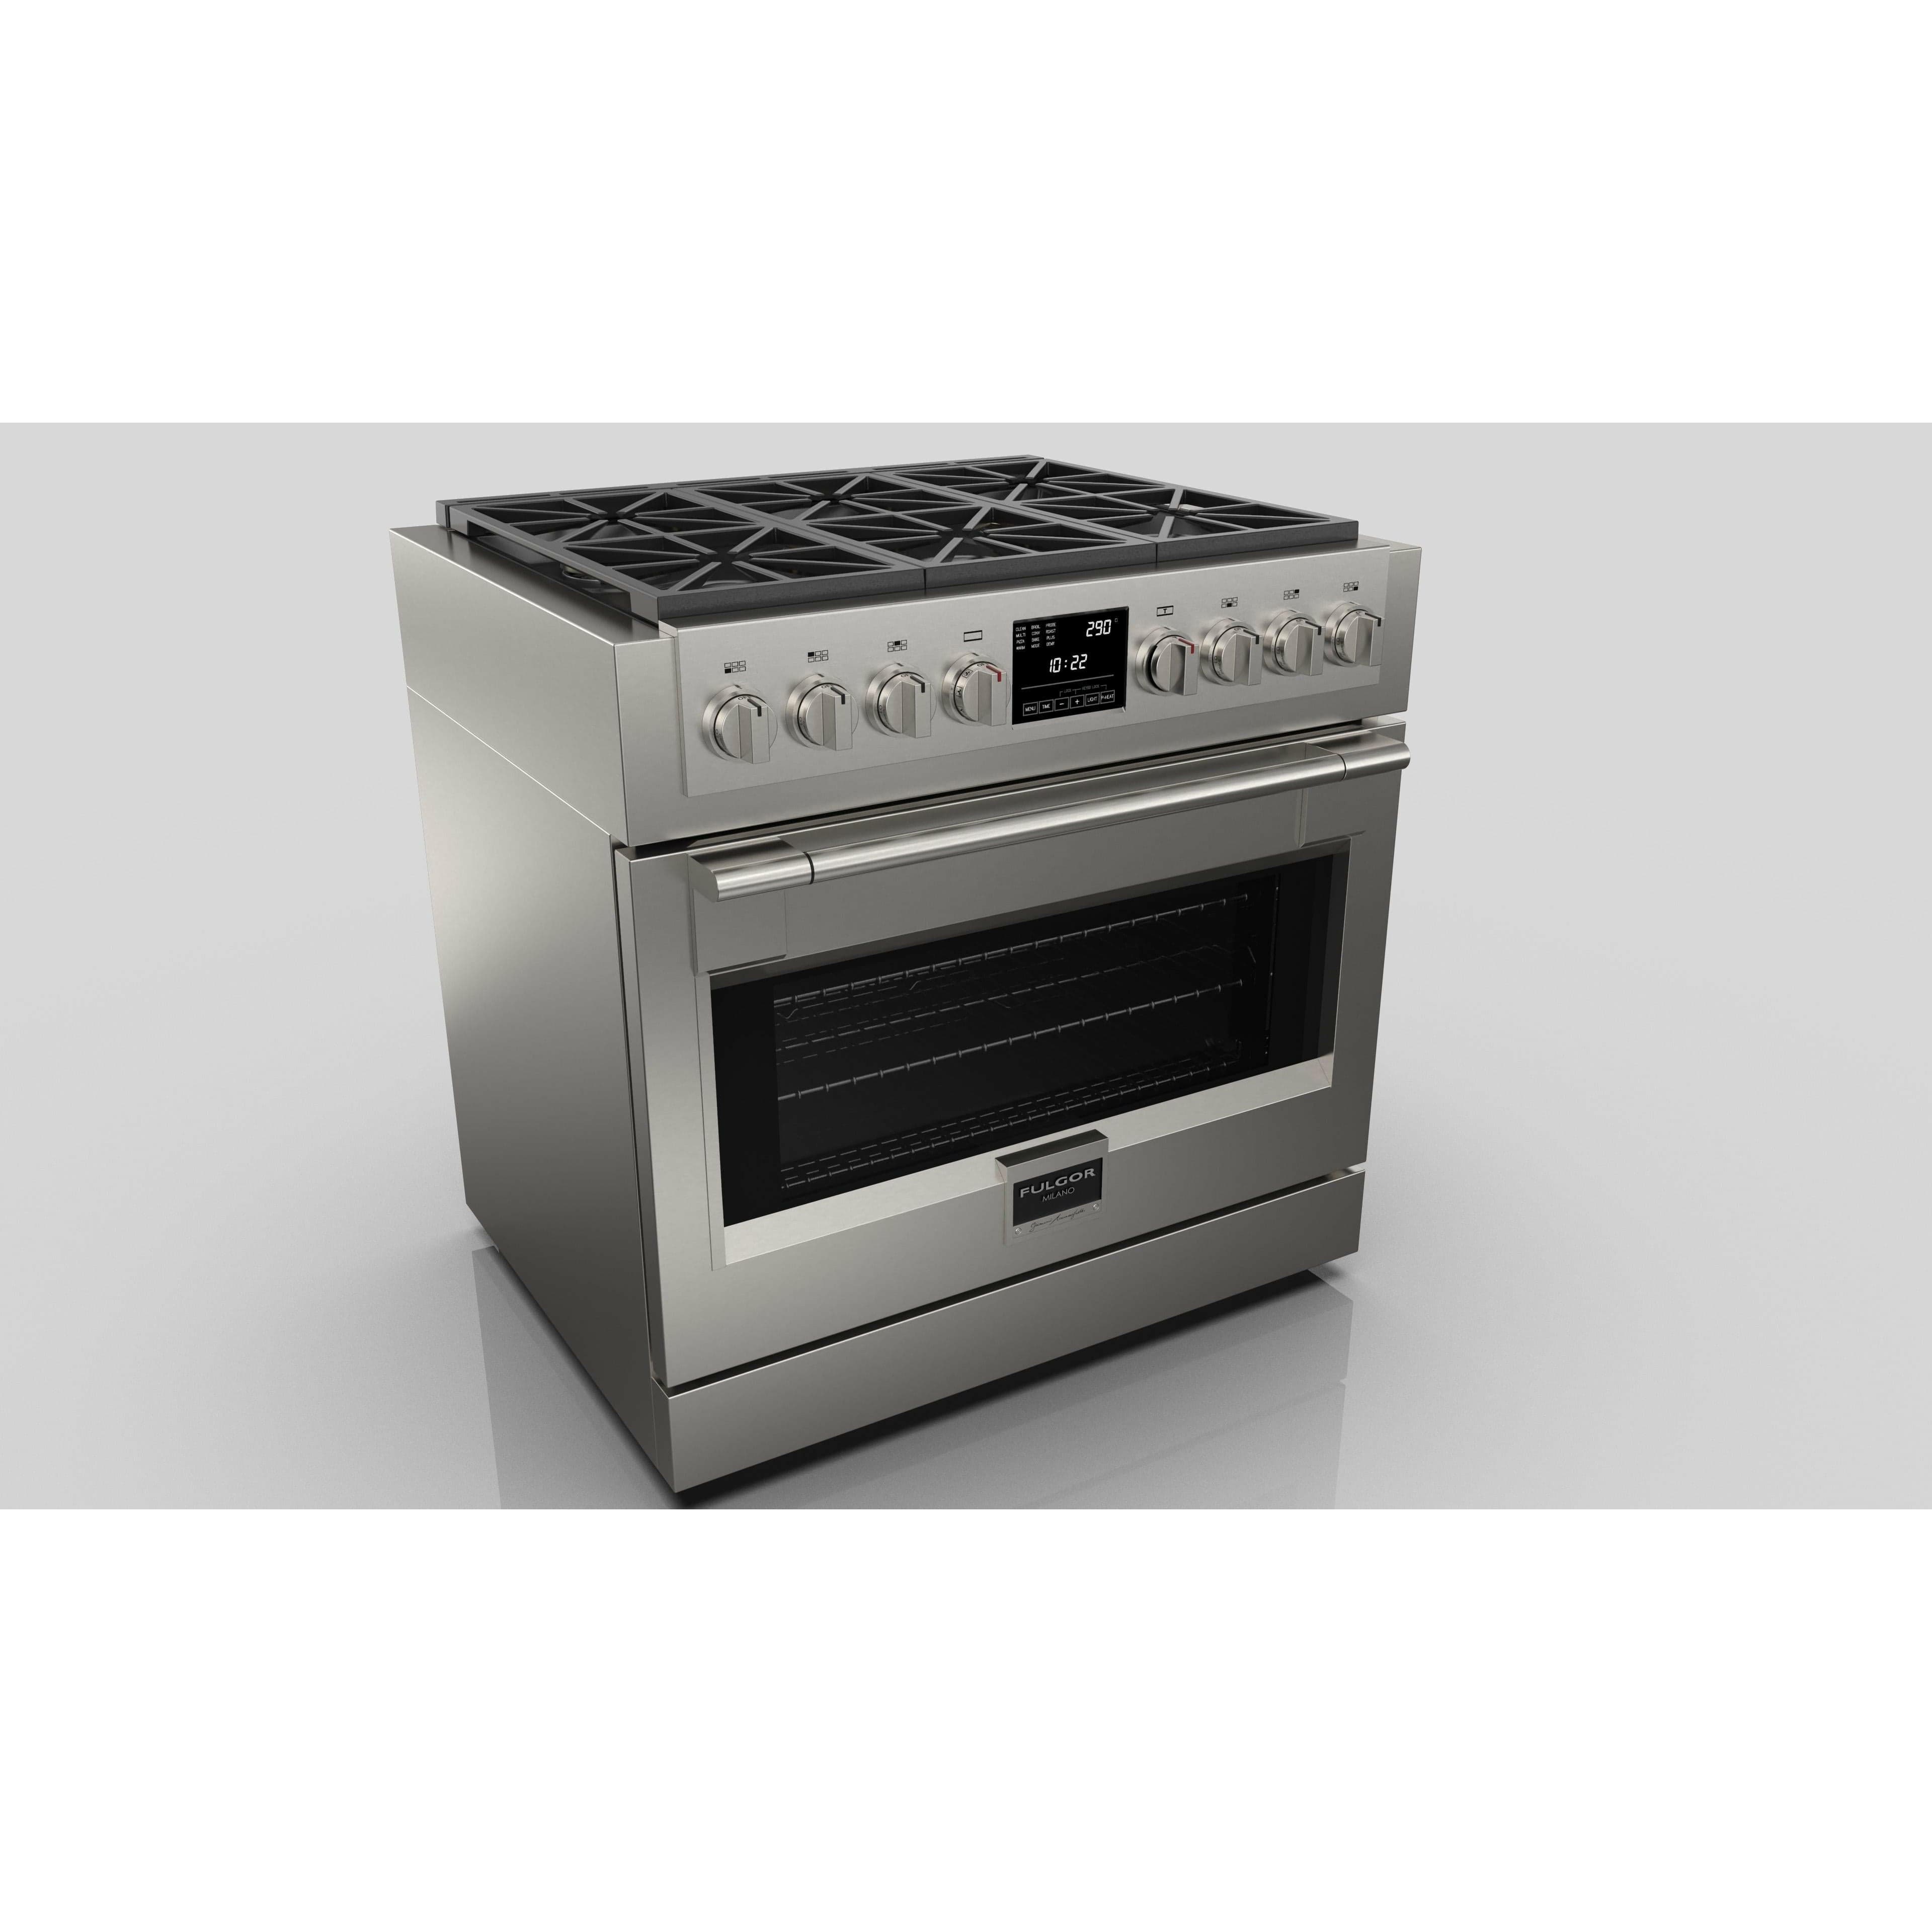 Fulgor Milano Package - 36" Dual Fuel Range, 36" French Door Refrigerator, 24" Built-In Dishwasher and 36" Wall Range Hood Ranges F6PDF366S1F6FBM36S2 Luxury Appliances Direct